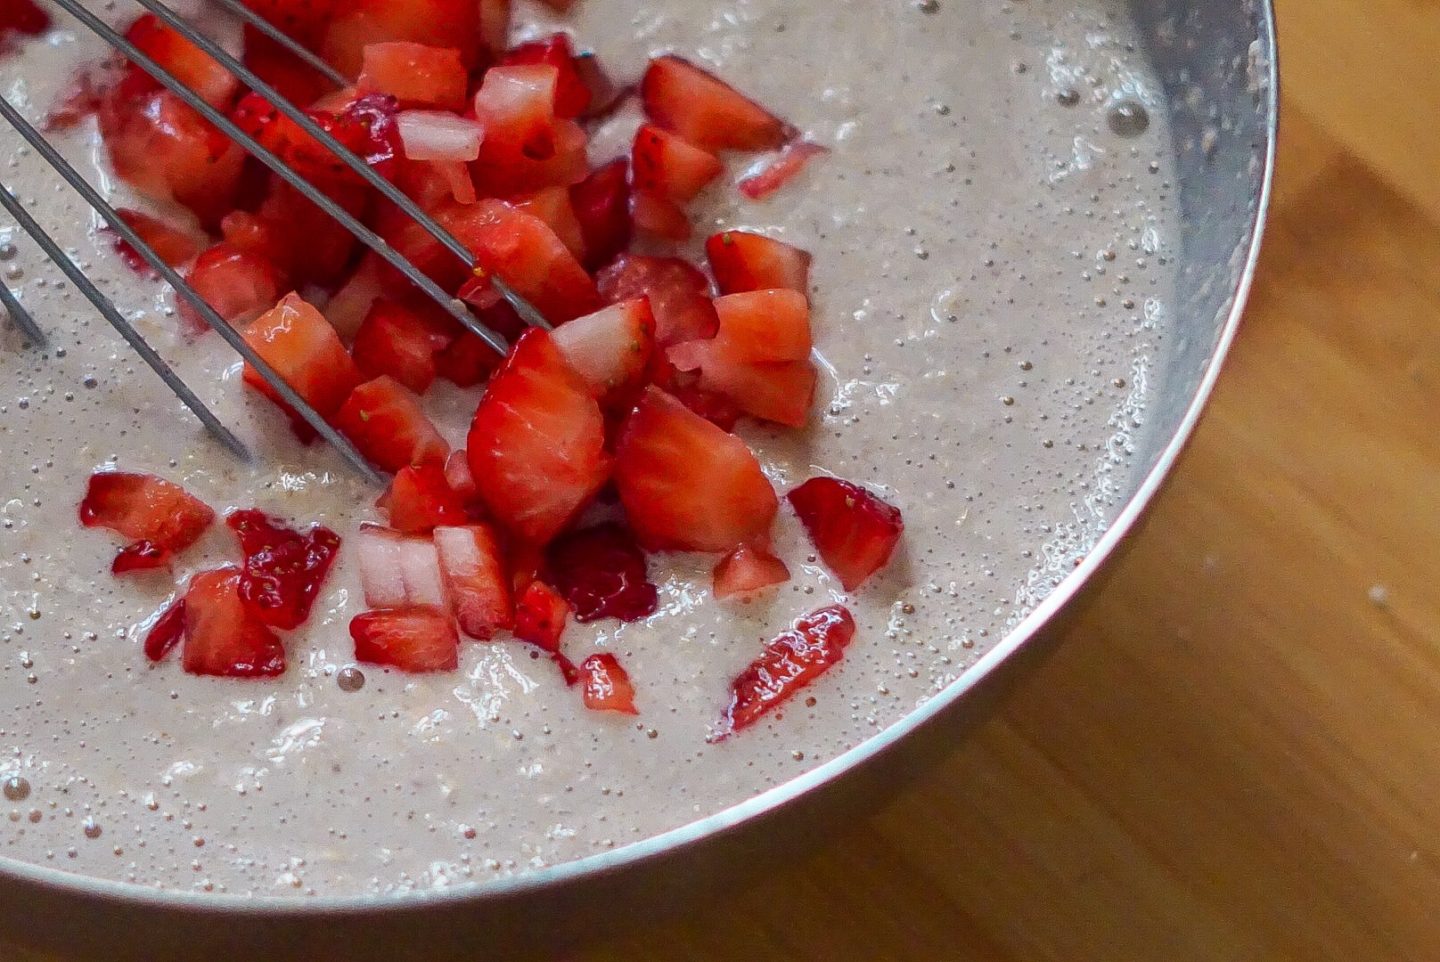 muffin batter in a mixing bowl with fresh strawberries